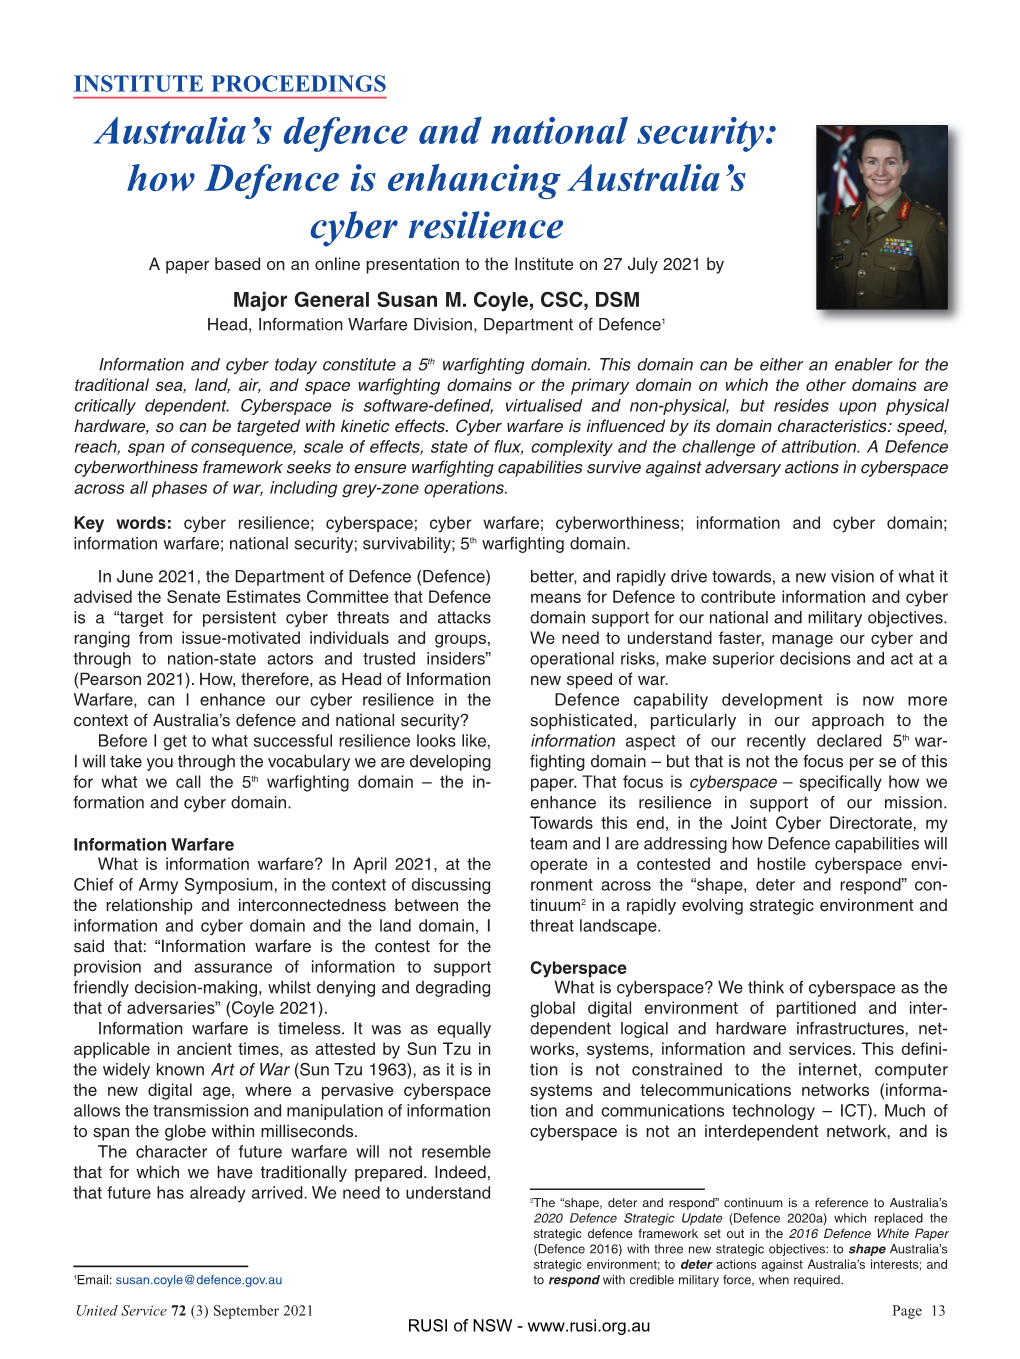 How Defence Is Enhancing Australia's Cyber Resilience